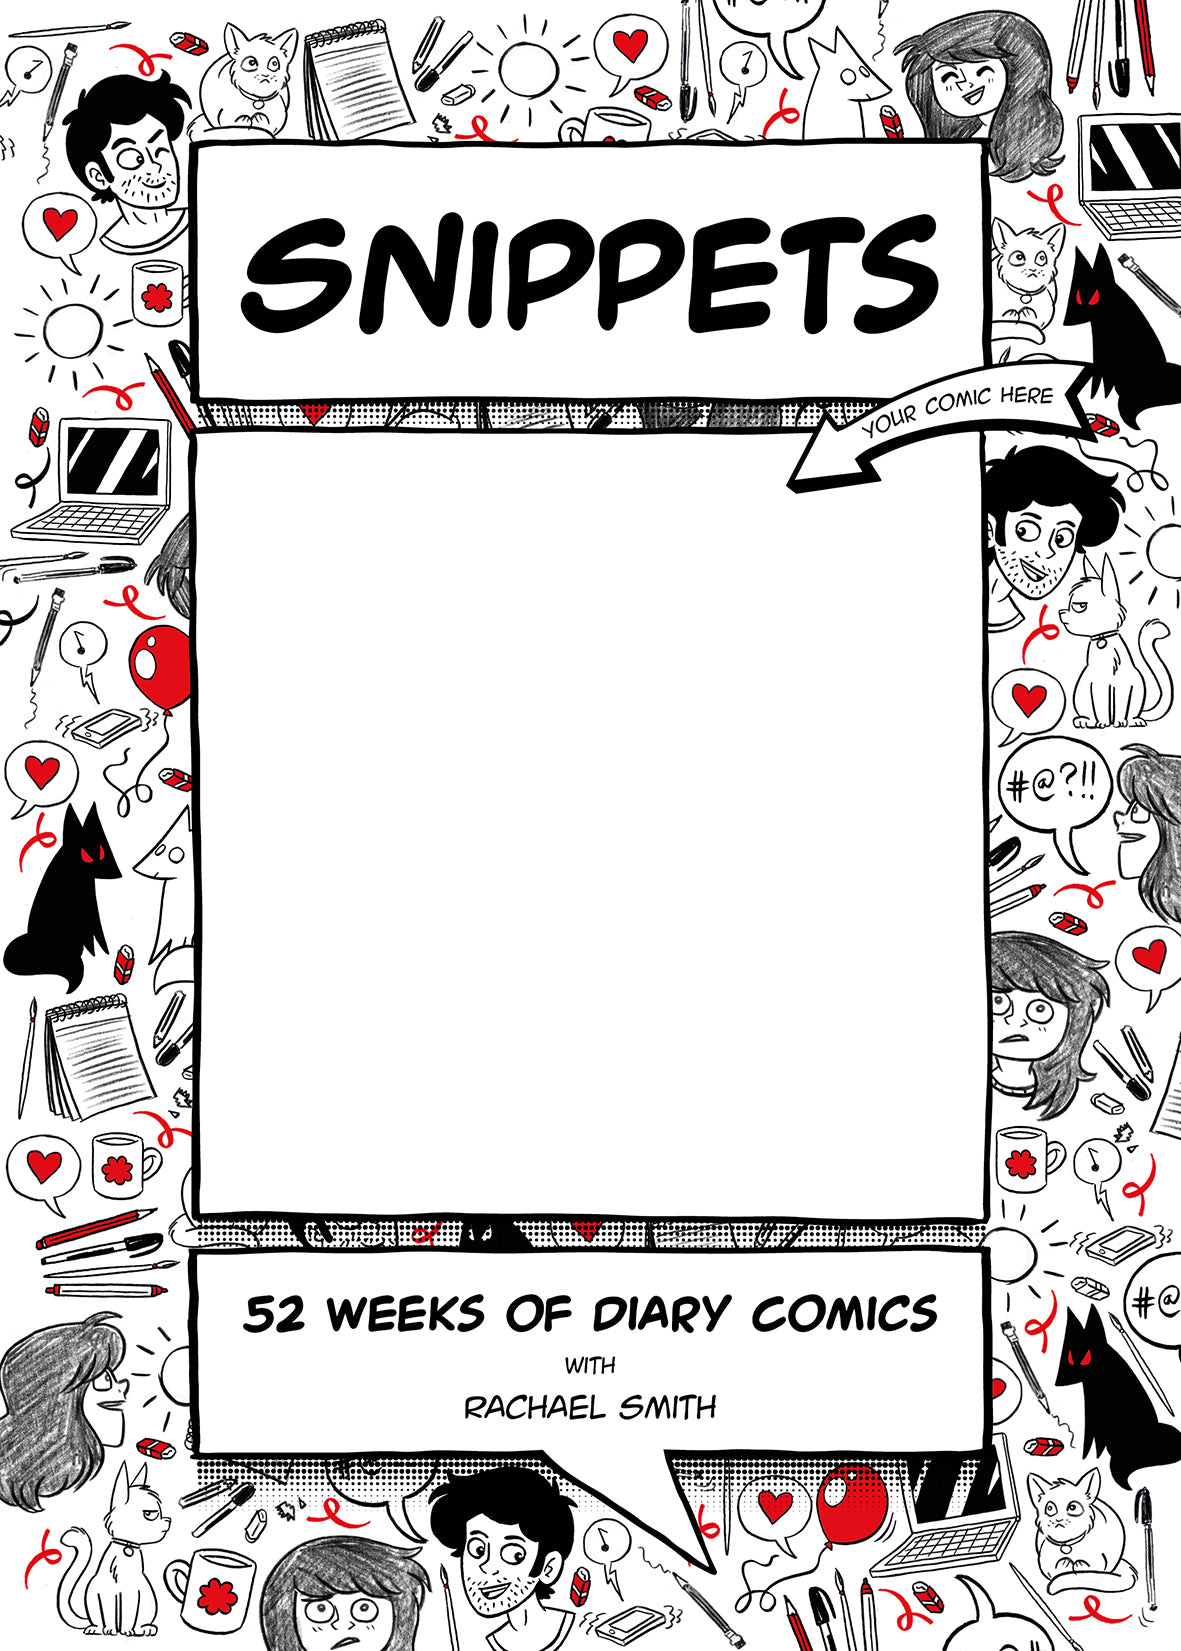 Snippets 52 weeks of diary comics by Rachael Smith